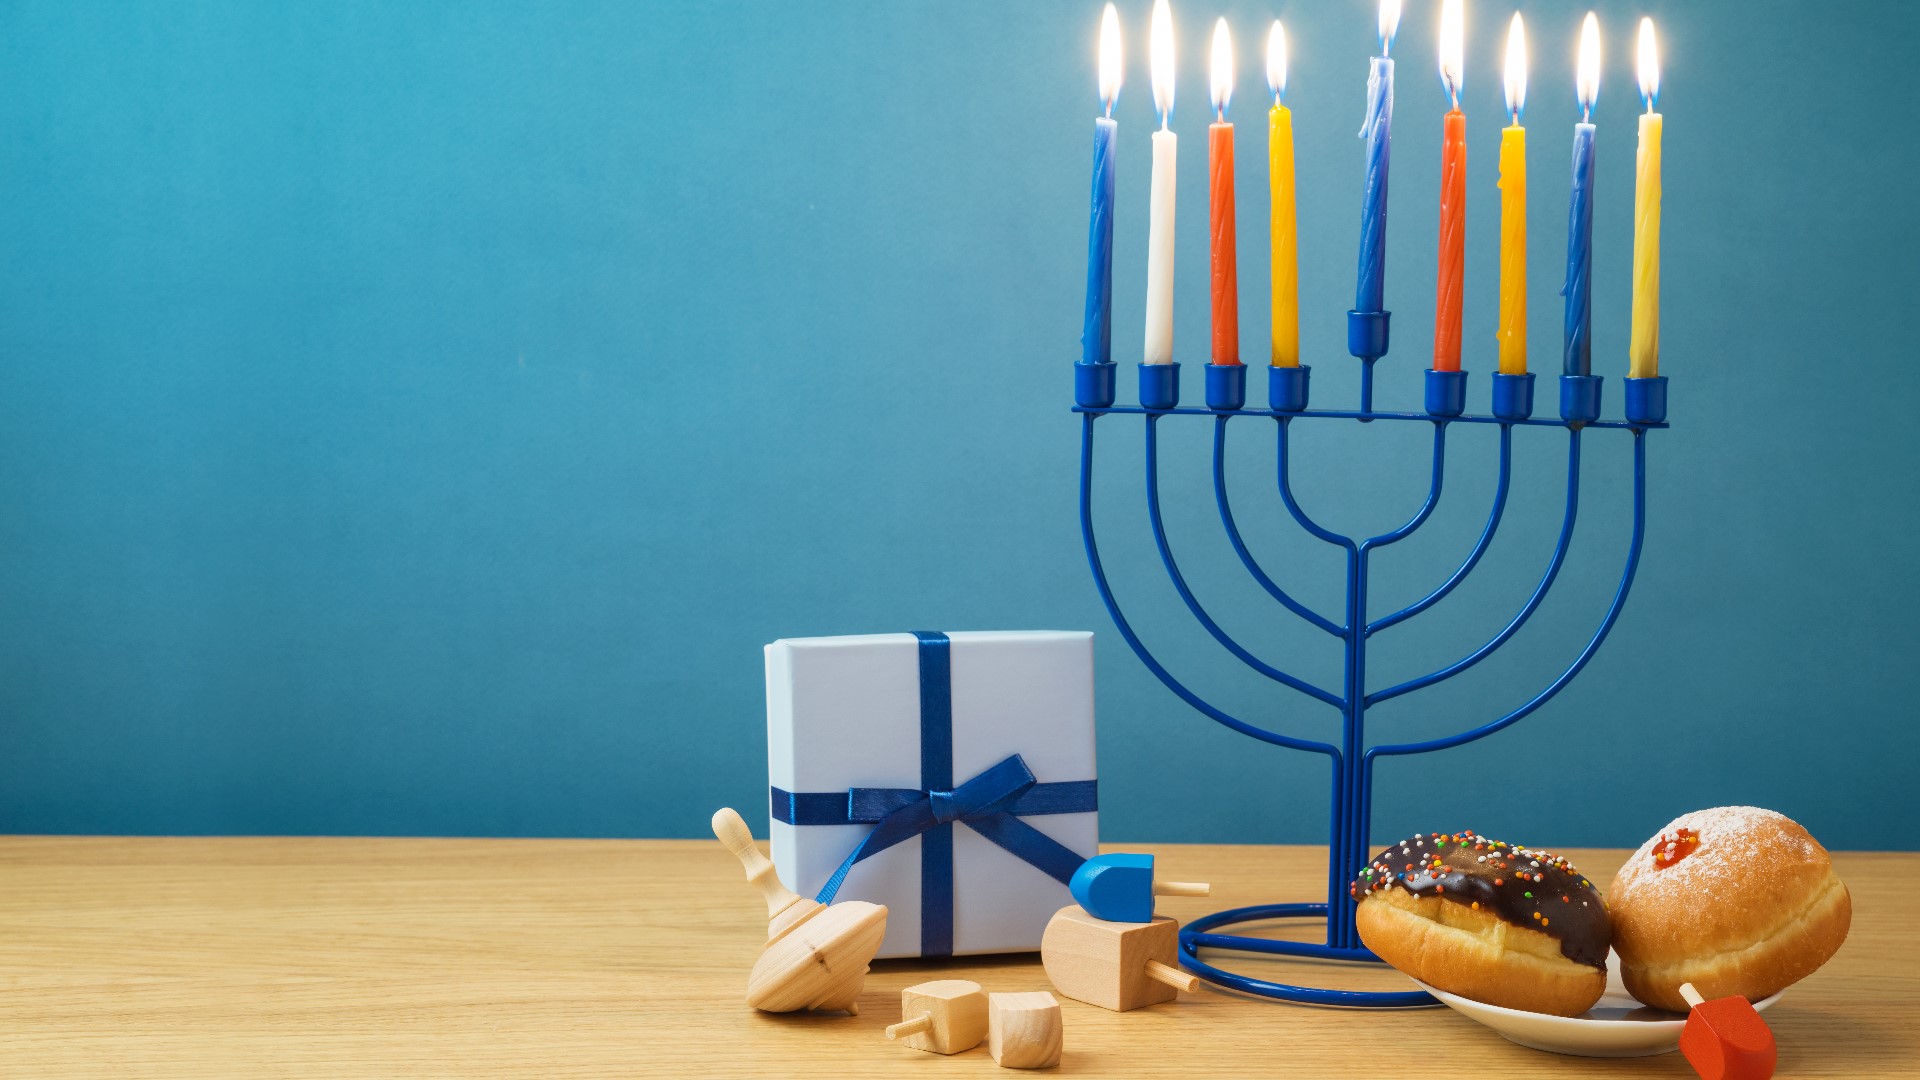 The meaning behind traditions like menorahs, dreidels, and fried foods